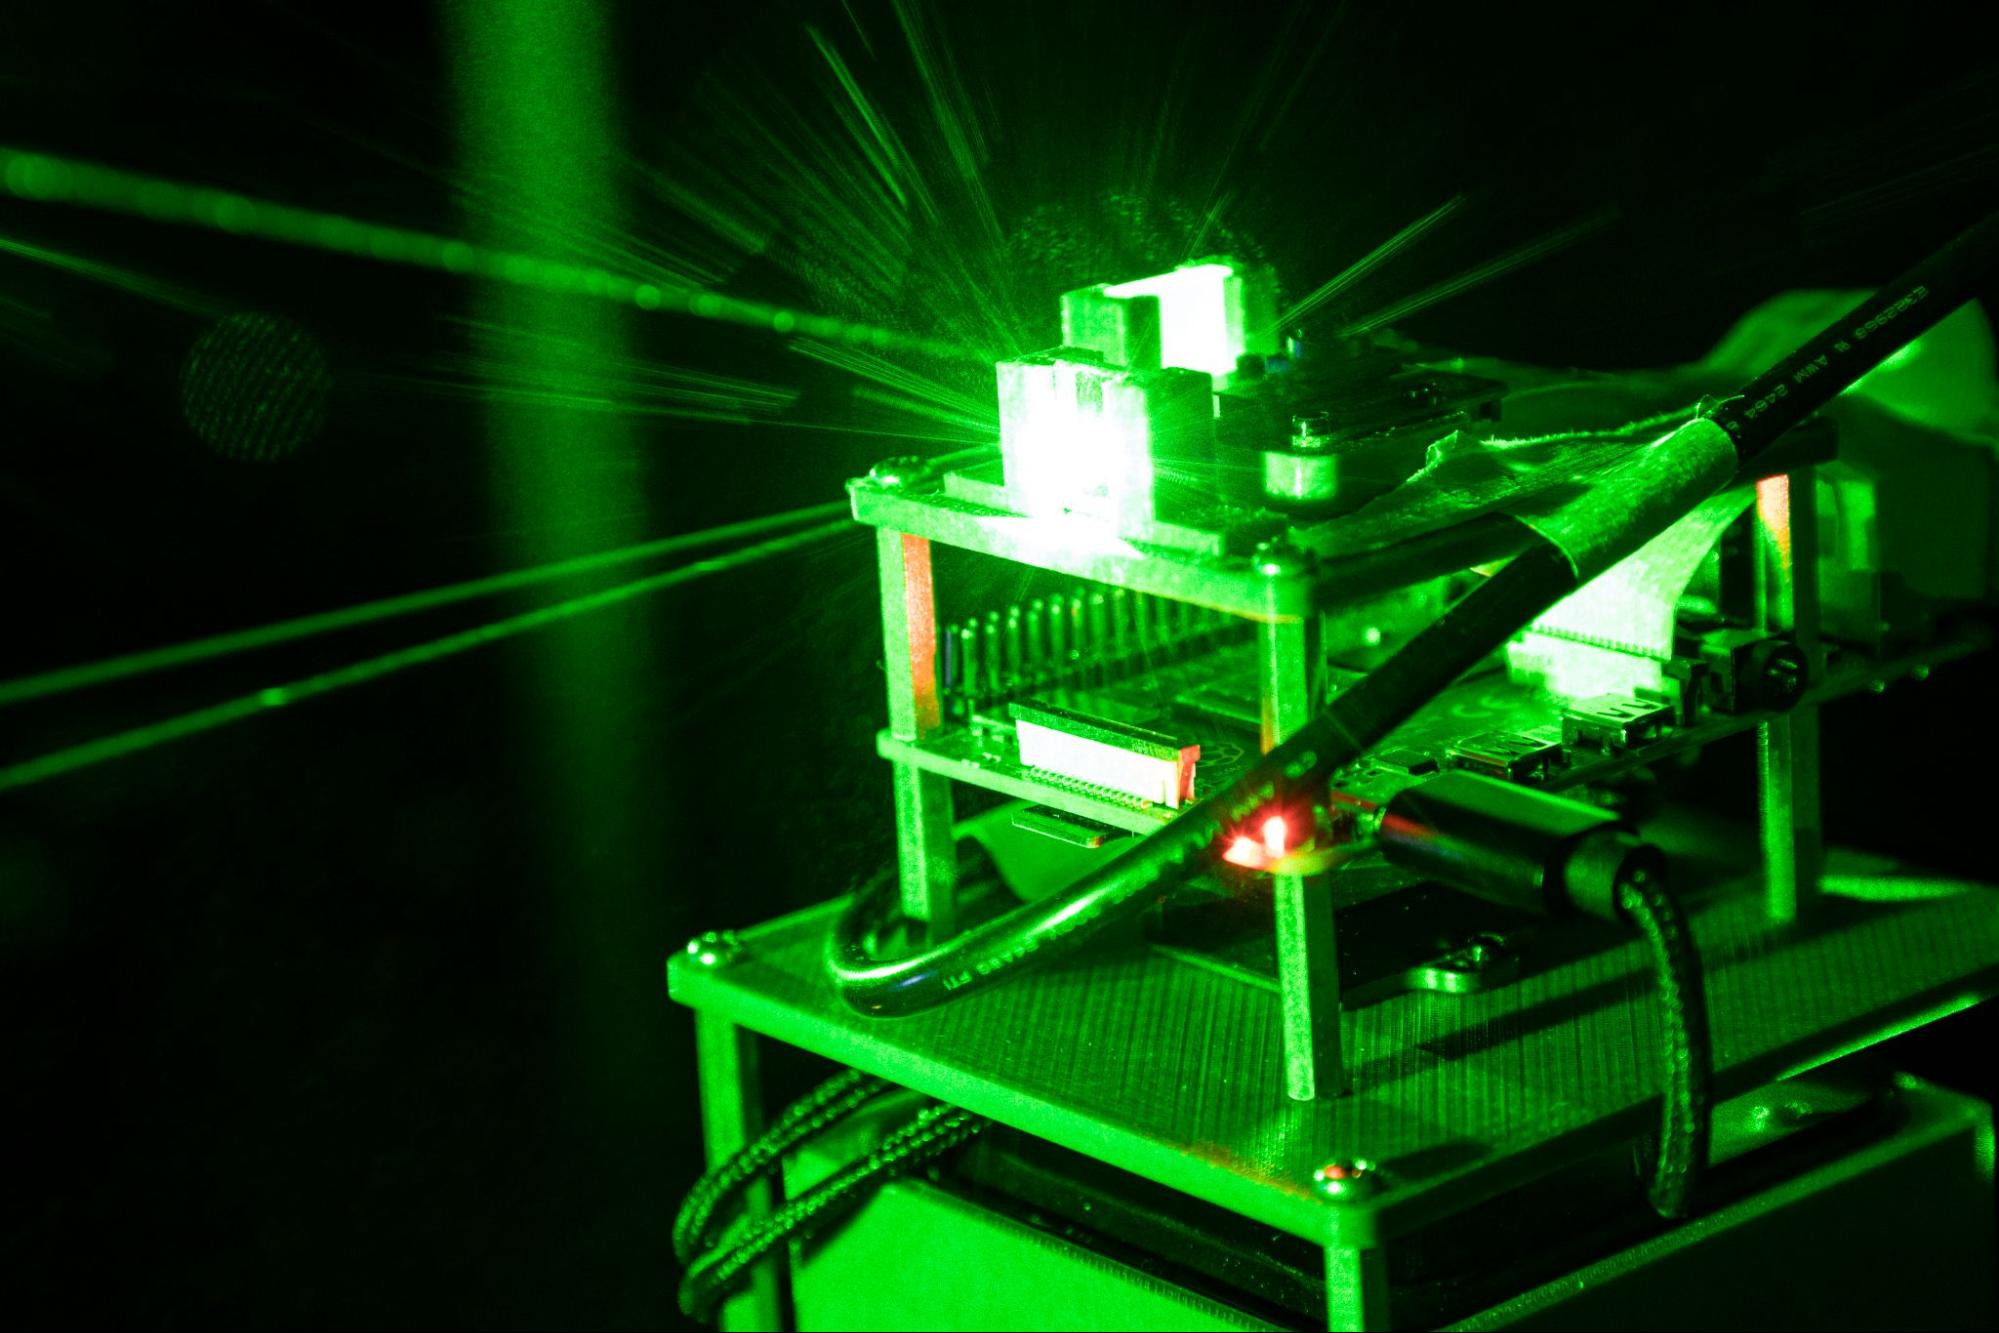 Optical metrology subsystem operation with highly directional green laser light as the sole illumination source.